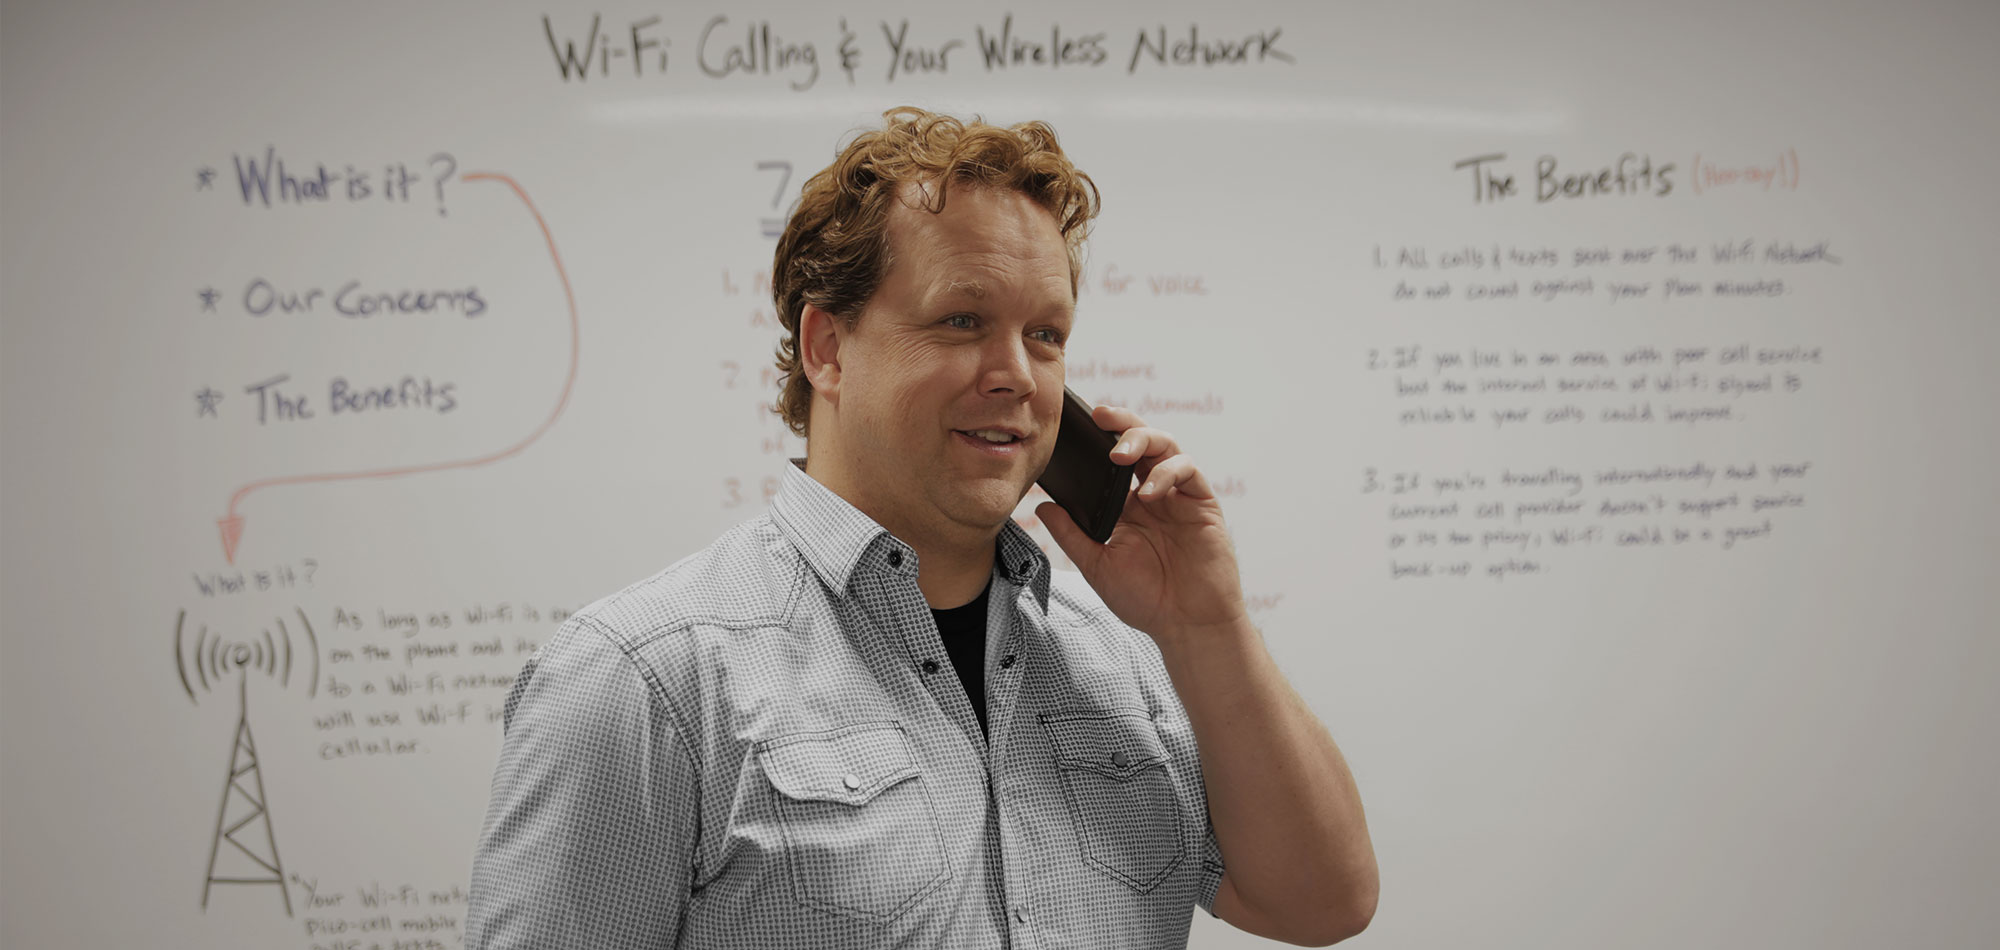 Wi-Fi-Calling-and-your-Wireless-Network-Whiteboard-Wednesday-Video.jpg